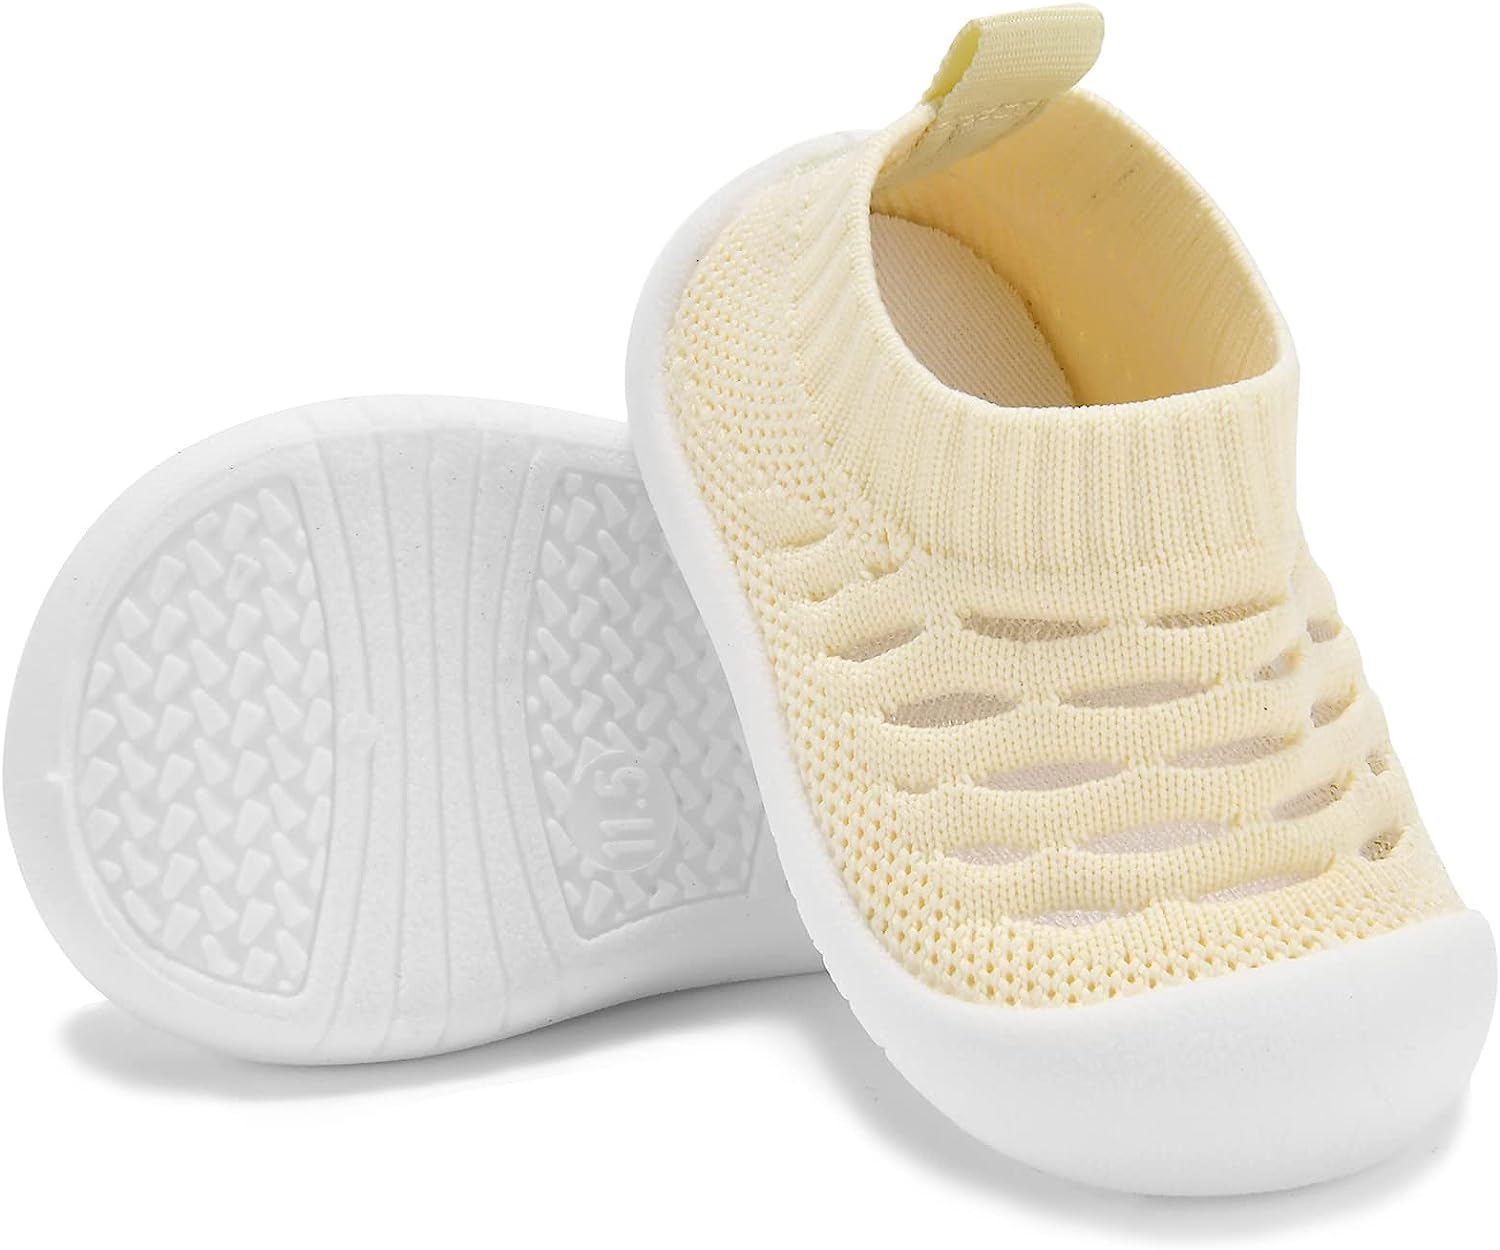 Exegawe Baby Shoes for Boys Girls - Infant Toddler [...]